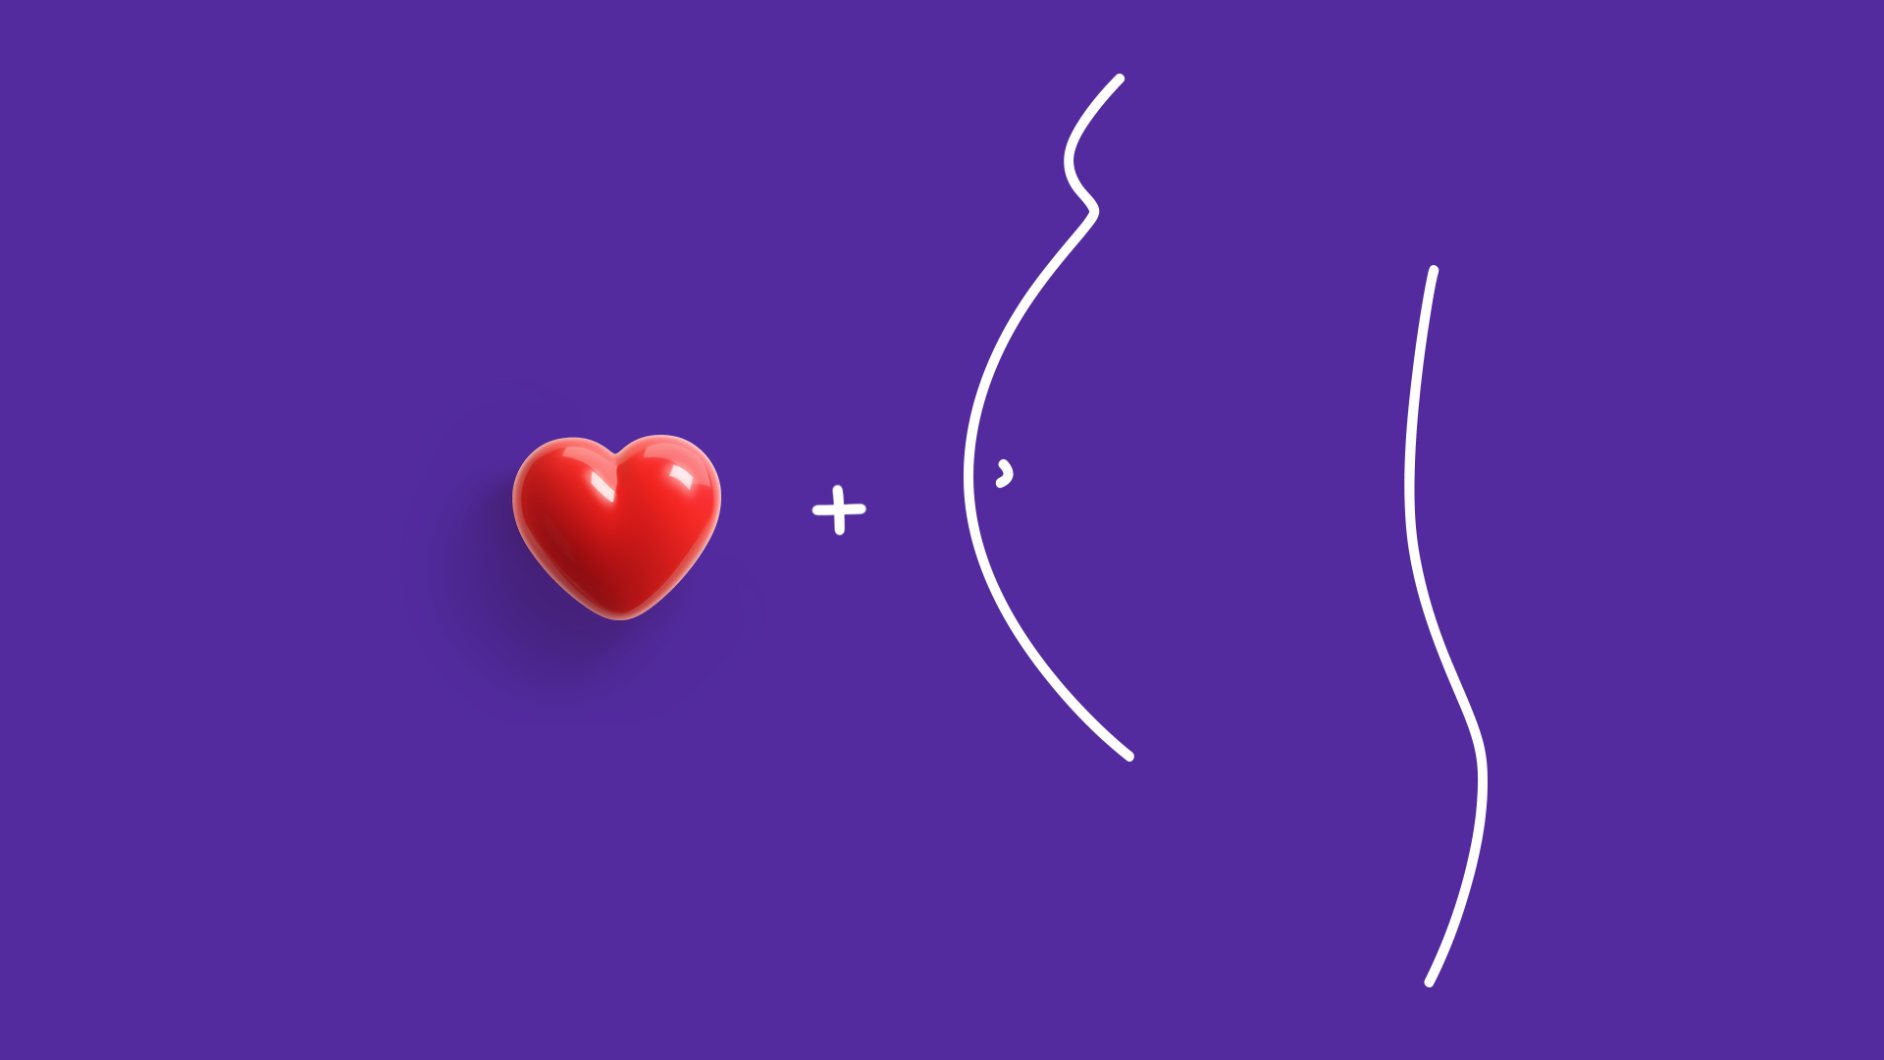 A drawing of a pregnant woman with a heart represents normal heart rate for pregnant women